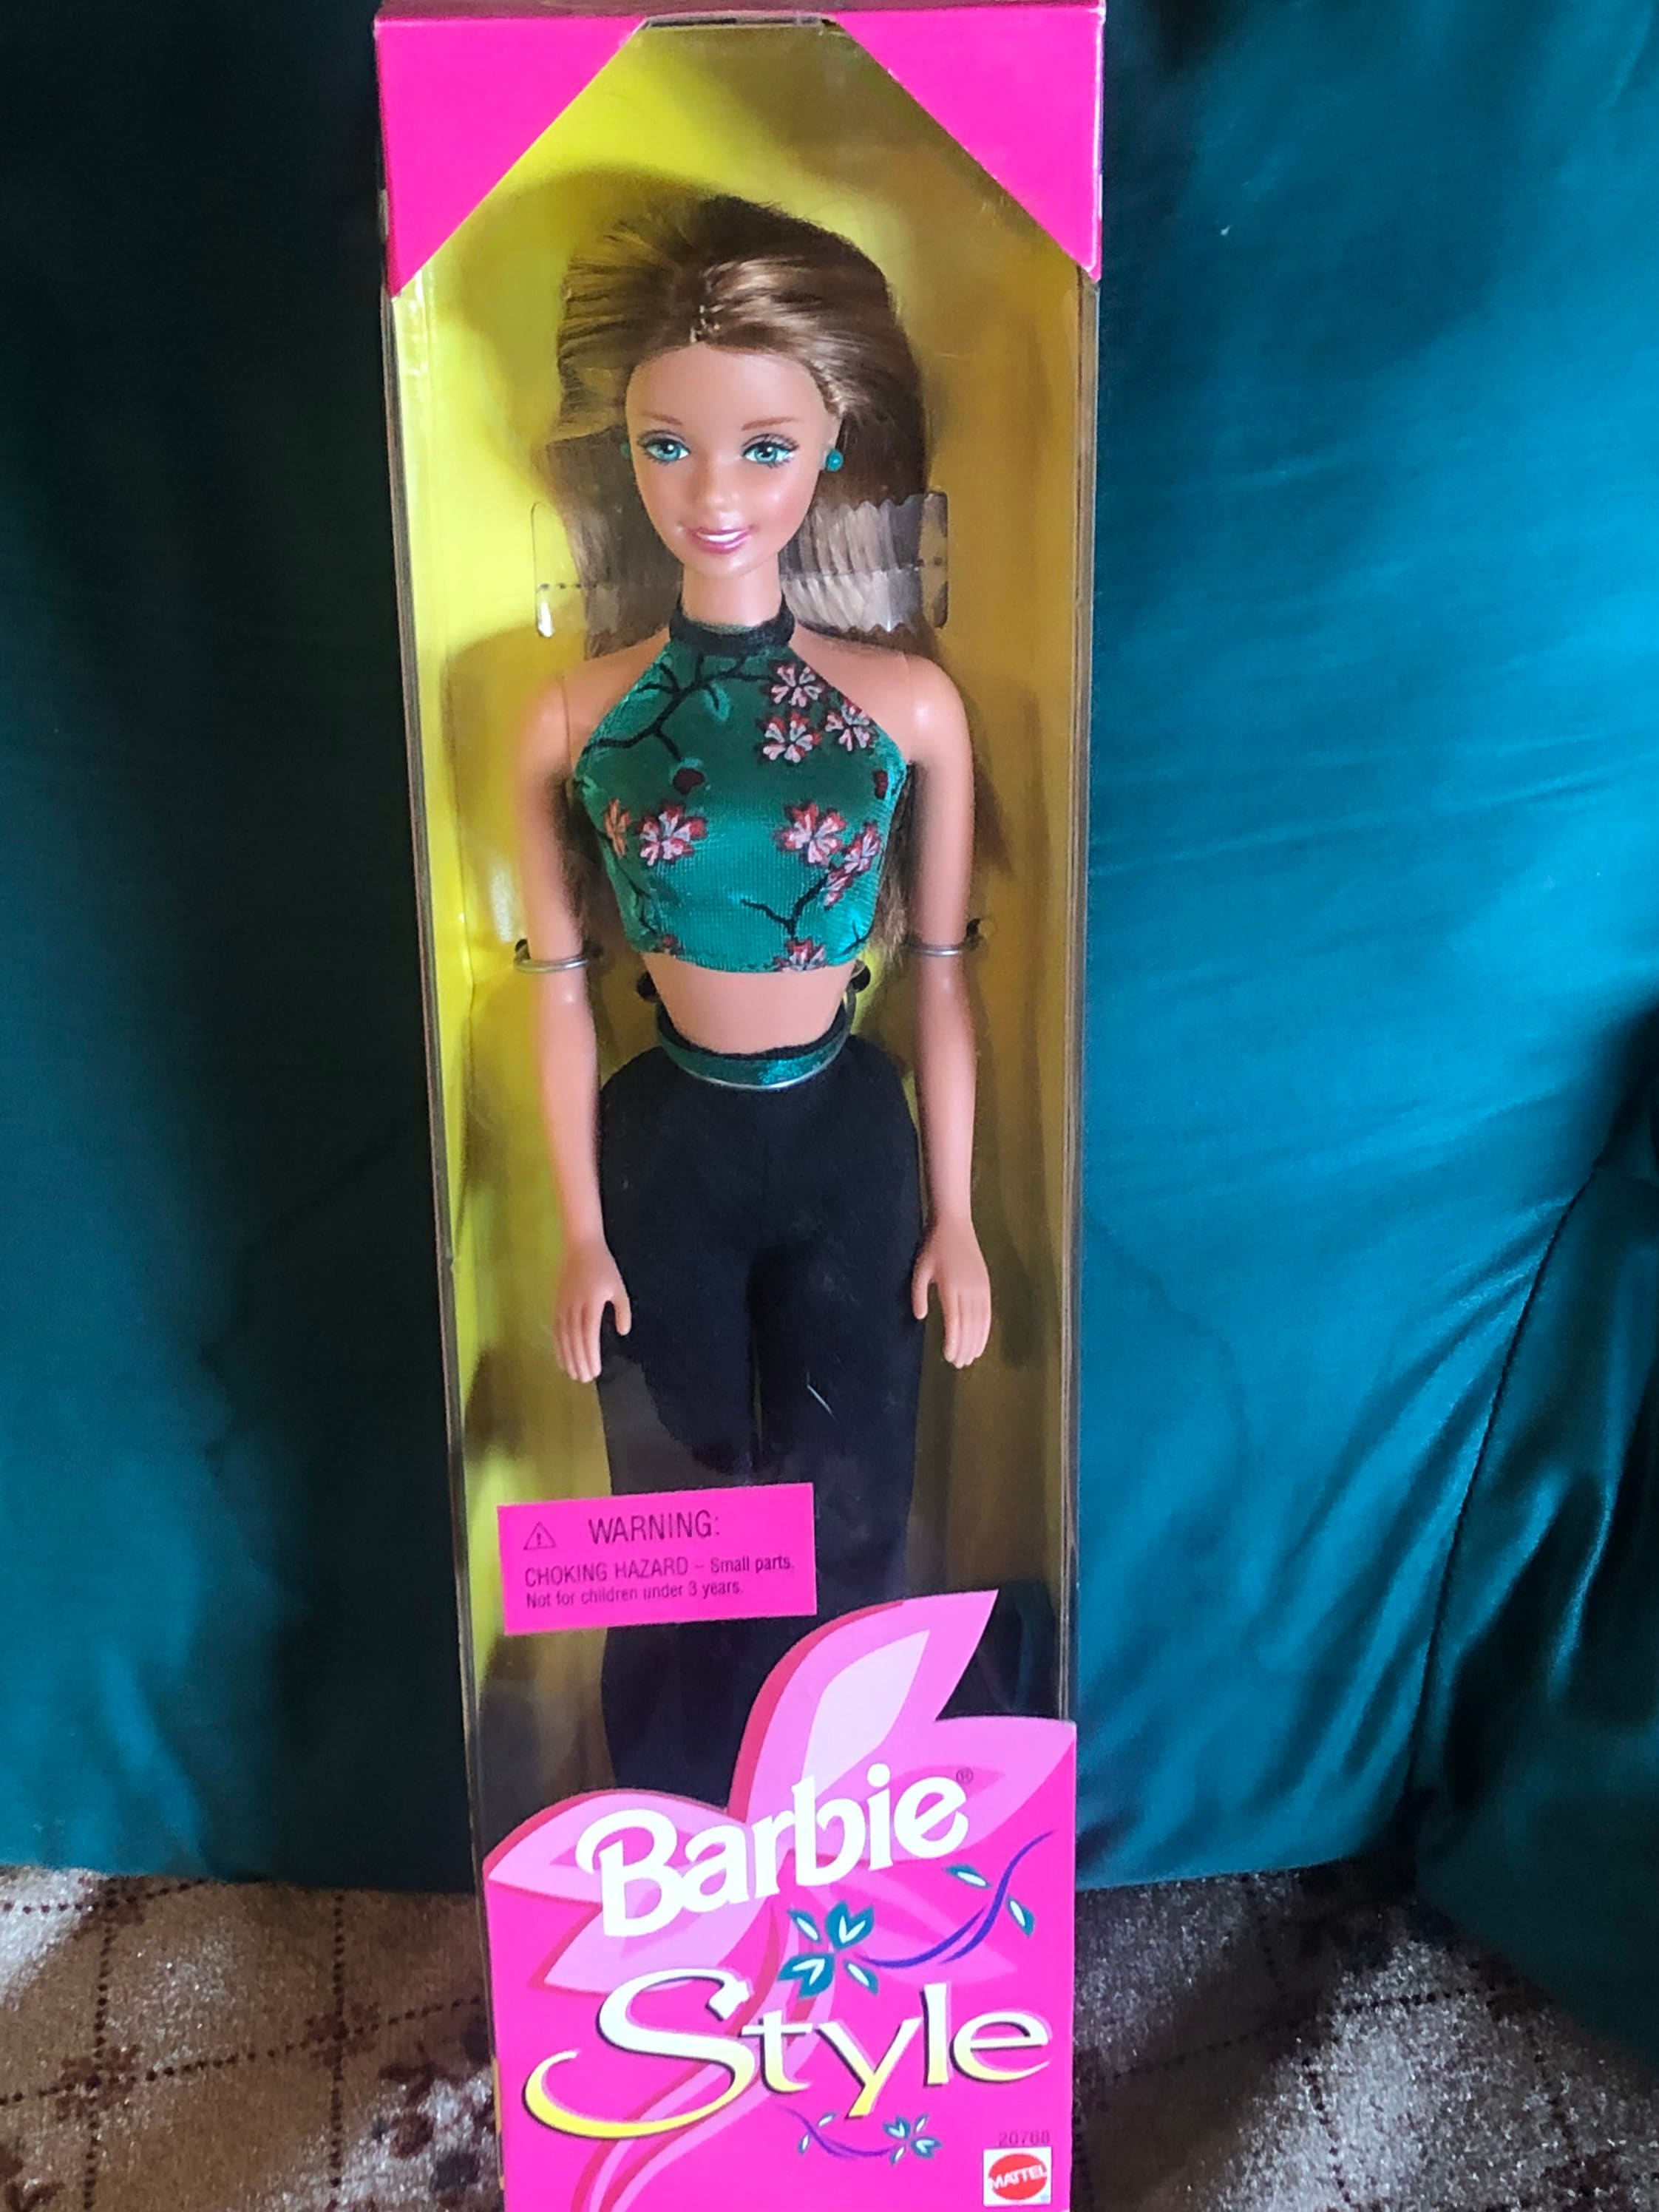 Catalog of Mattel Barbie dolls, action figures, collections and reference  data for Mattel Barbie dolls!